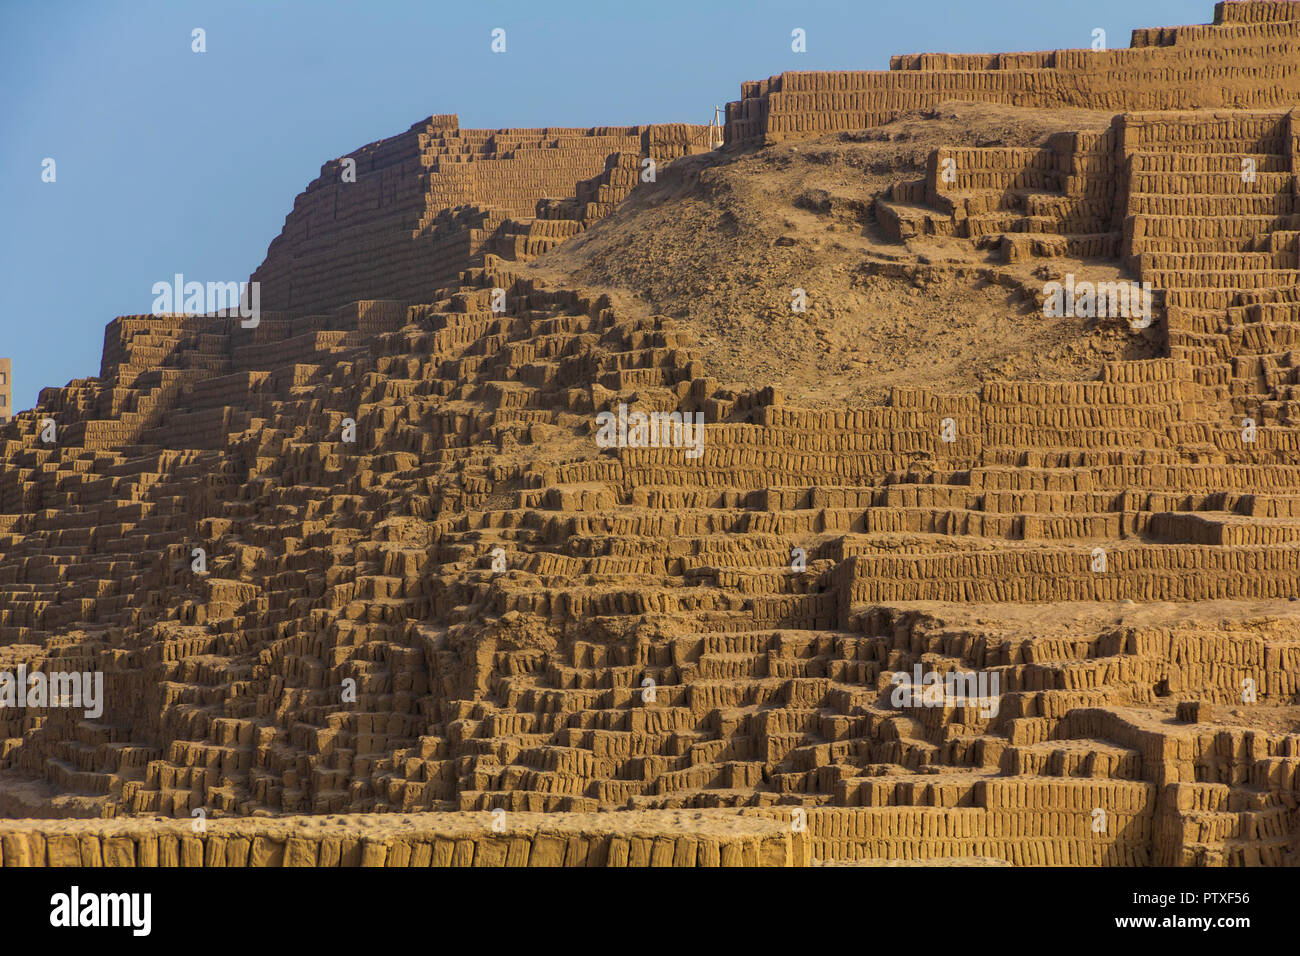 Huaca Pucllana, is a nearly 2000-year-old clay & adobe stepped pyramid from the Lima Culture, photographed in Miraflores, Lima, Peru in the summer. Stock Photo